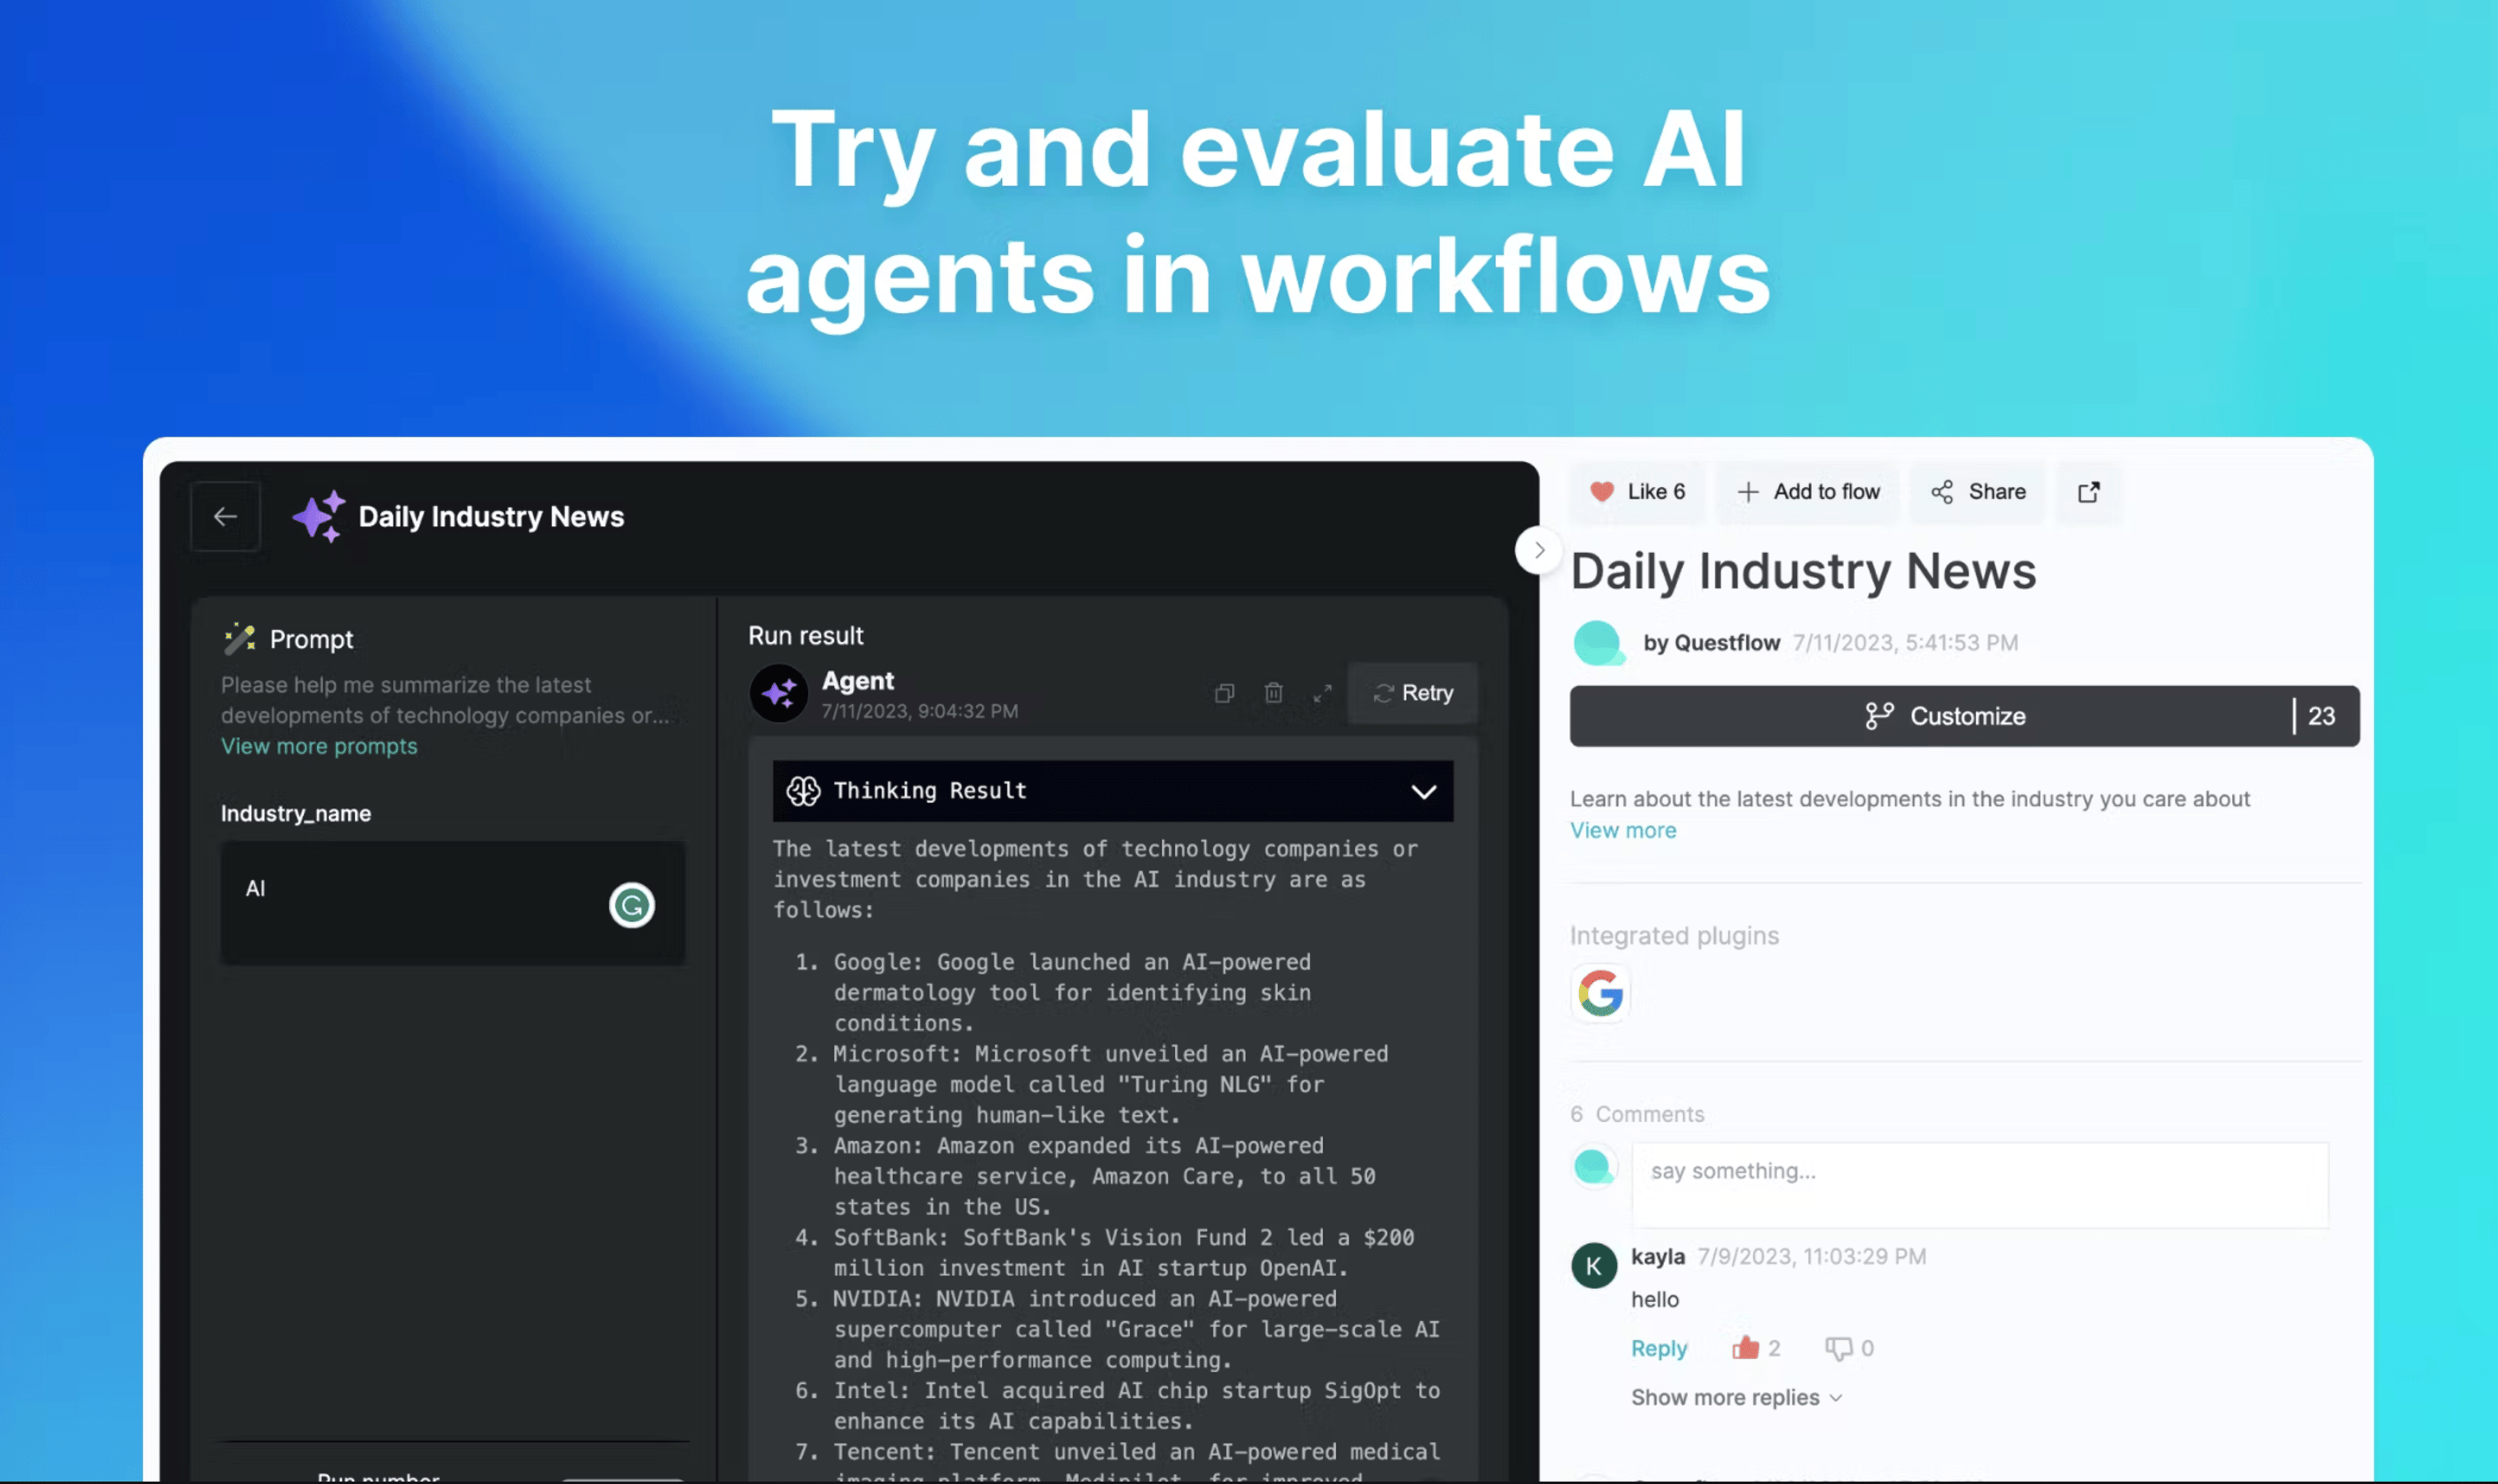 Questflow - Build AI Agents With No Code